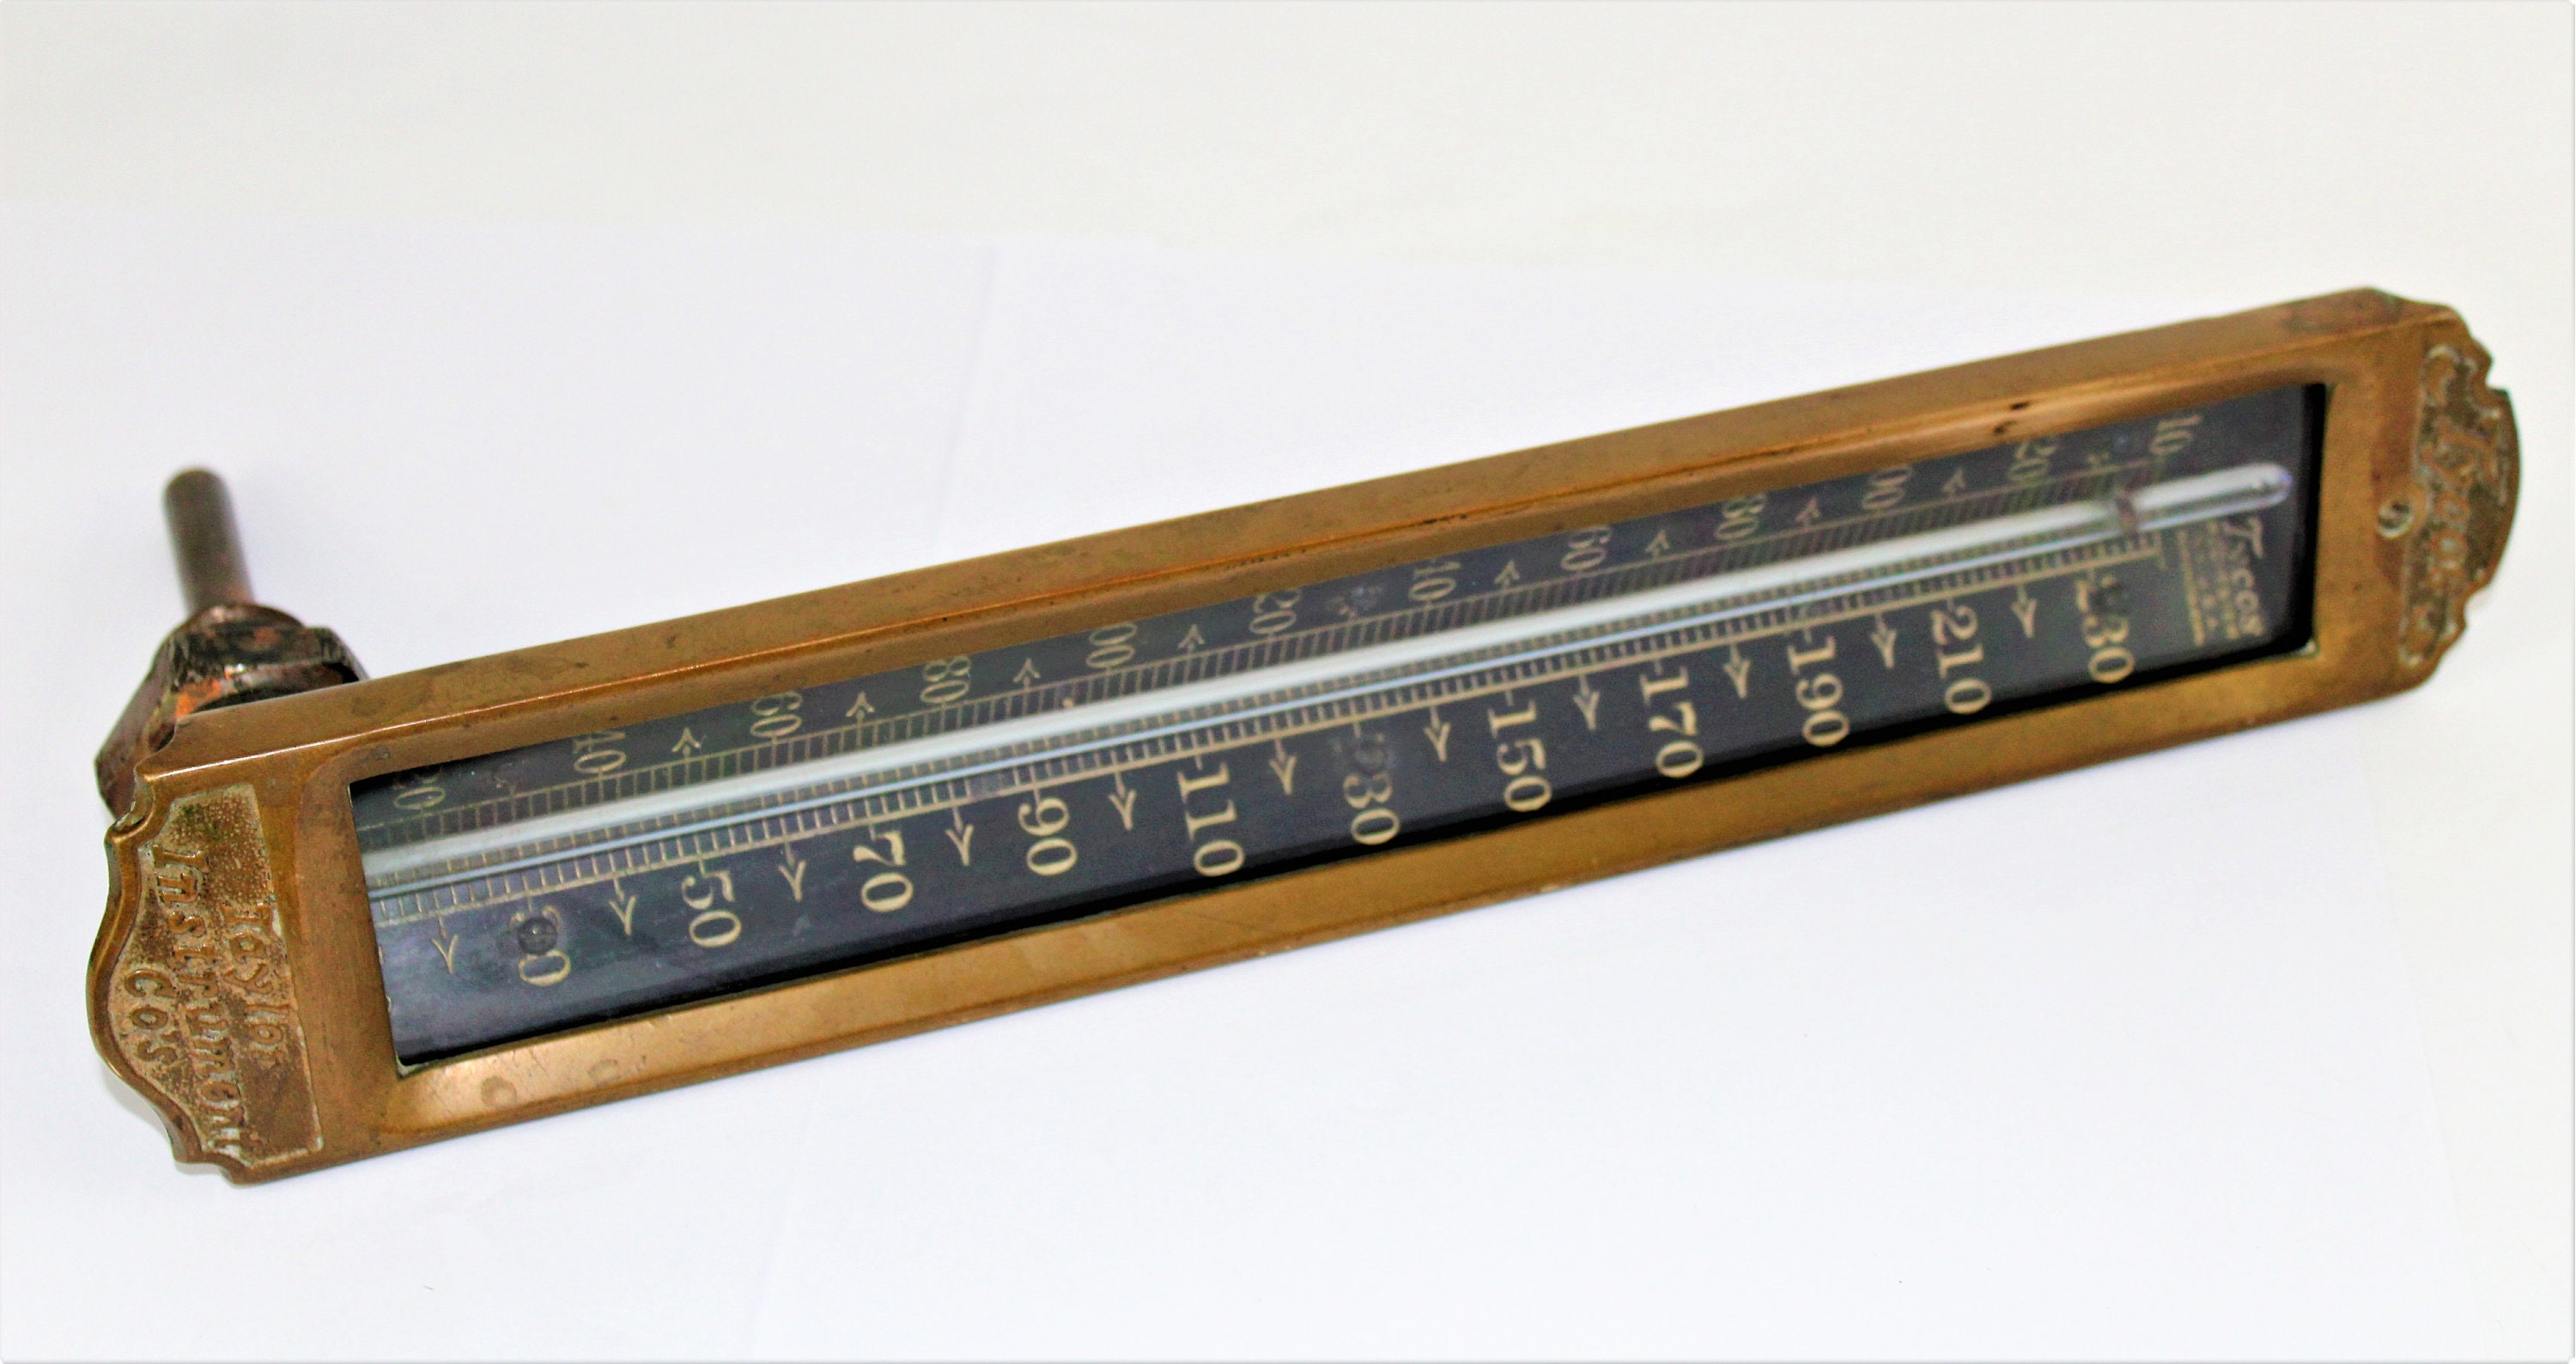 1913 Tycos Recording Thermometer Taylor Instrument Company 23600 Black